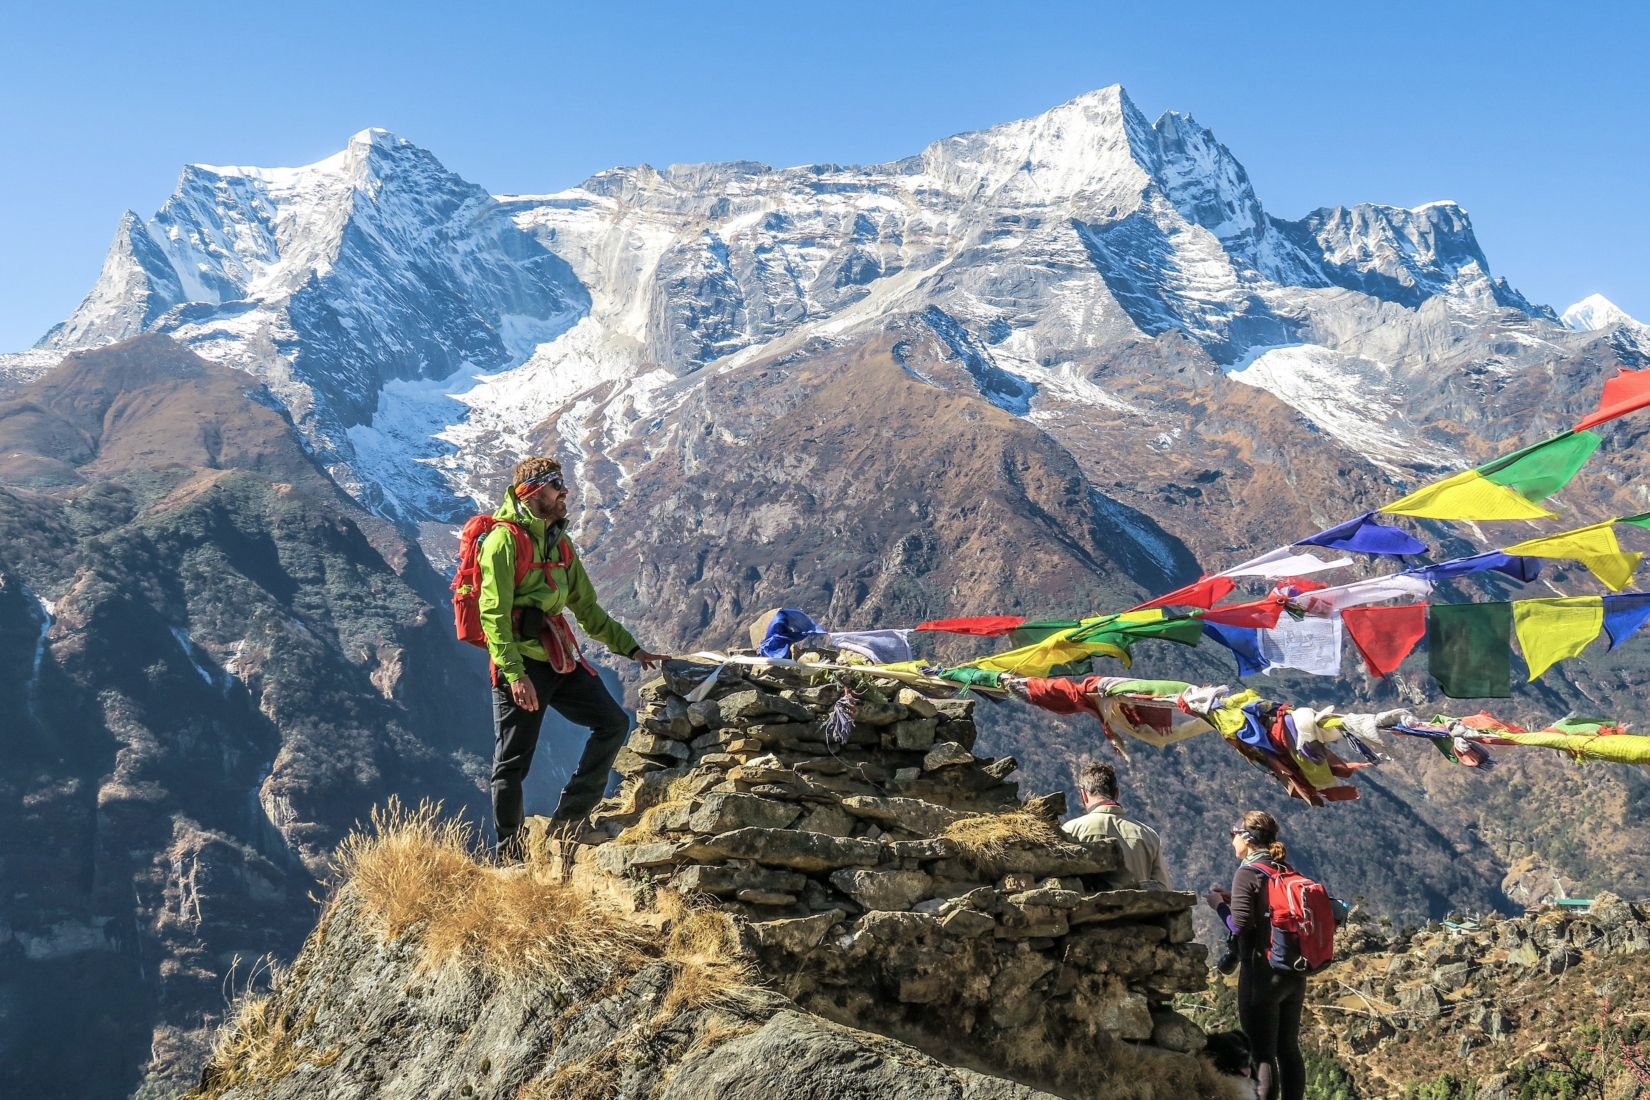 A trekker on the hike to Everest Base Camp admires the mountain views next to prayer flags